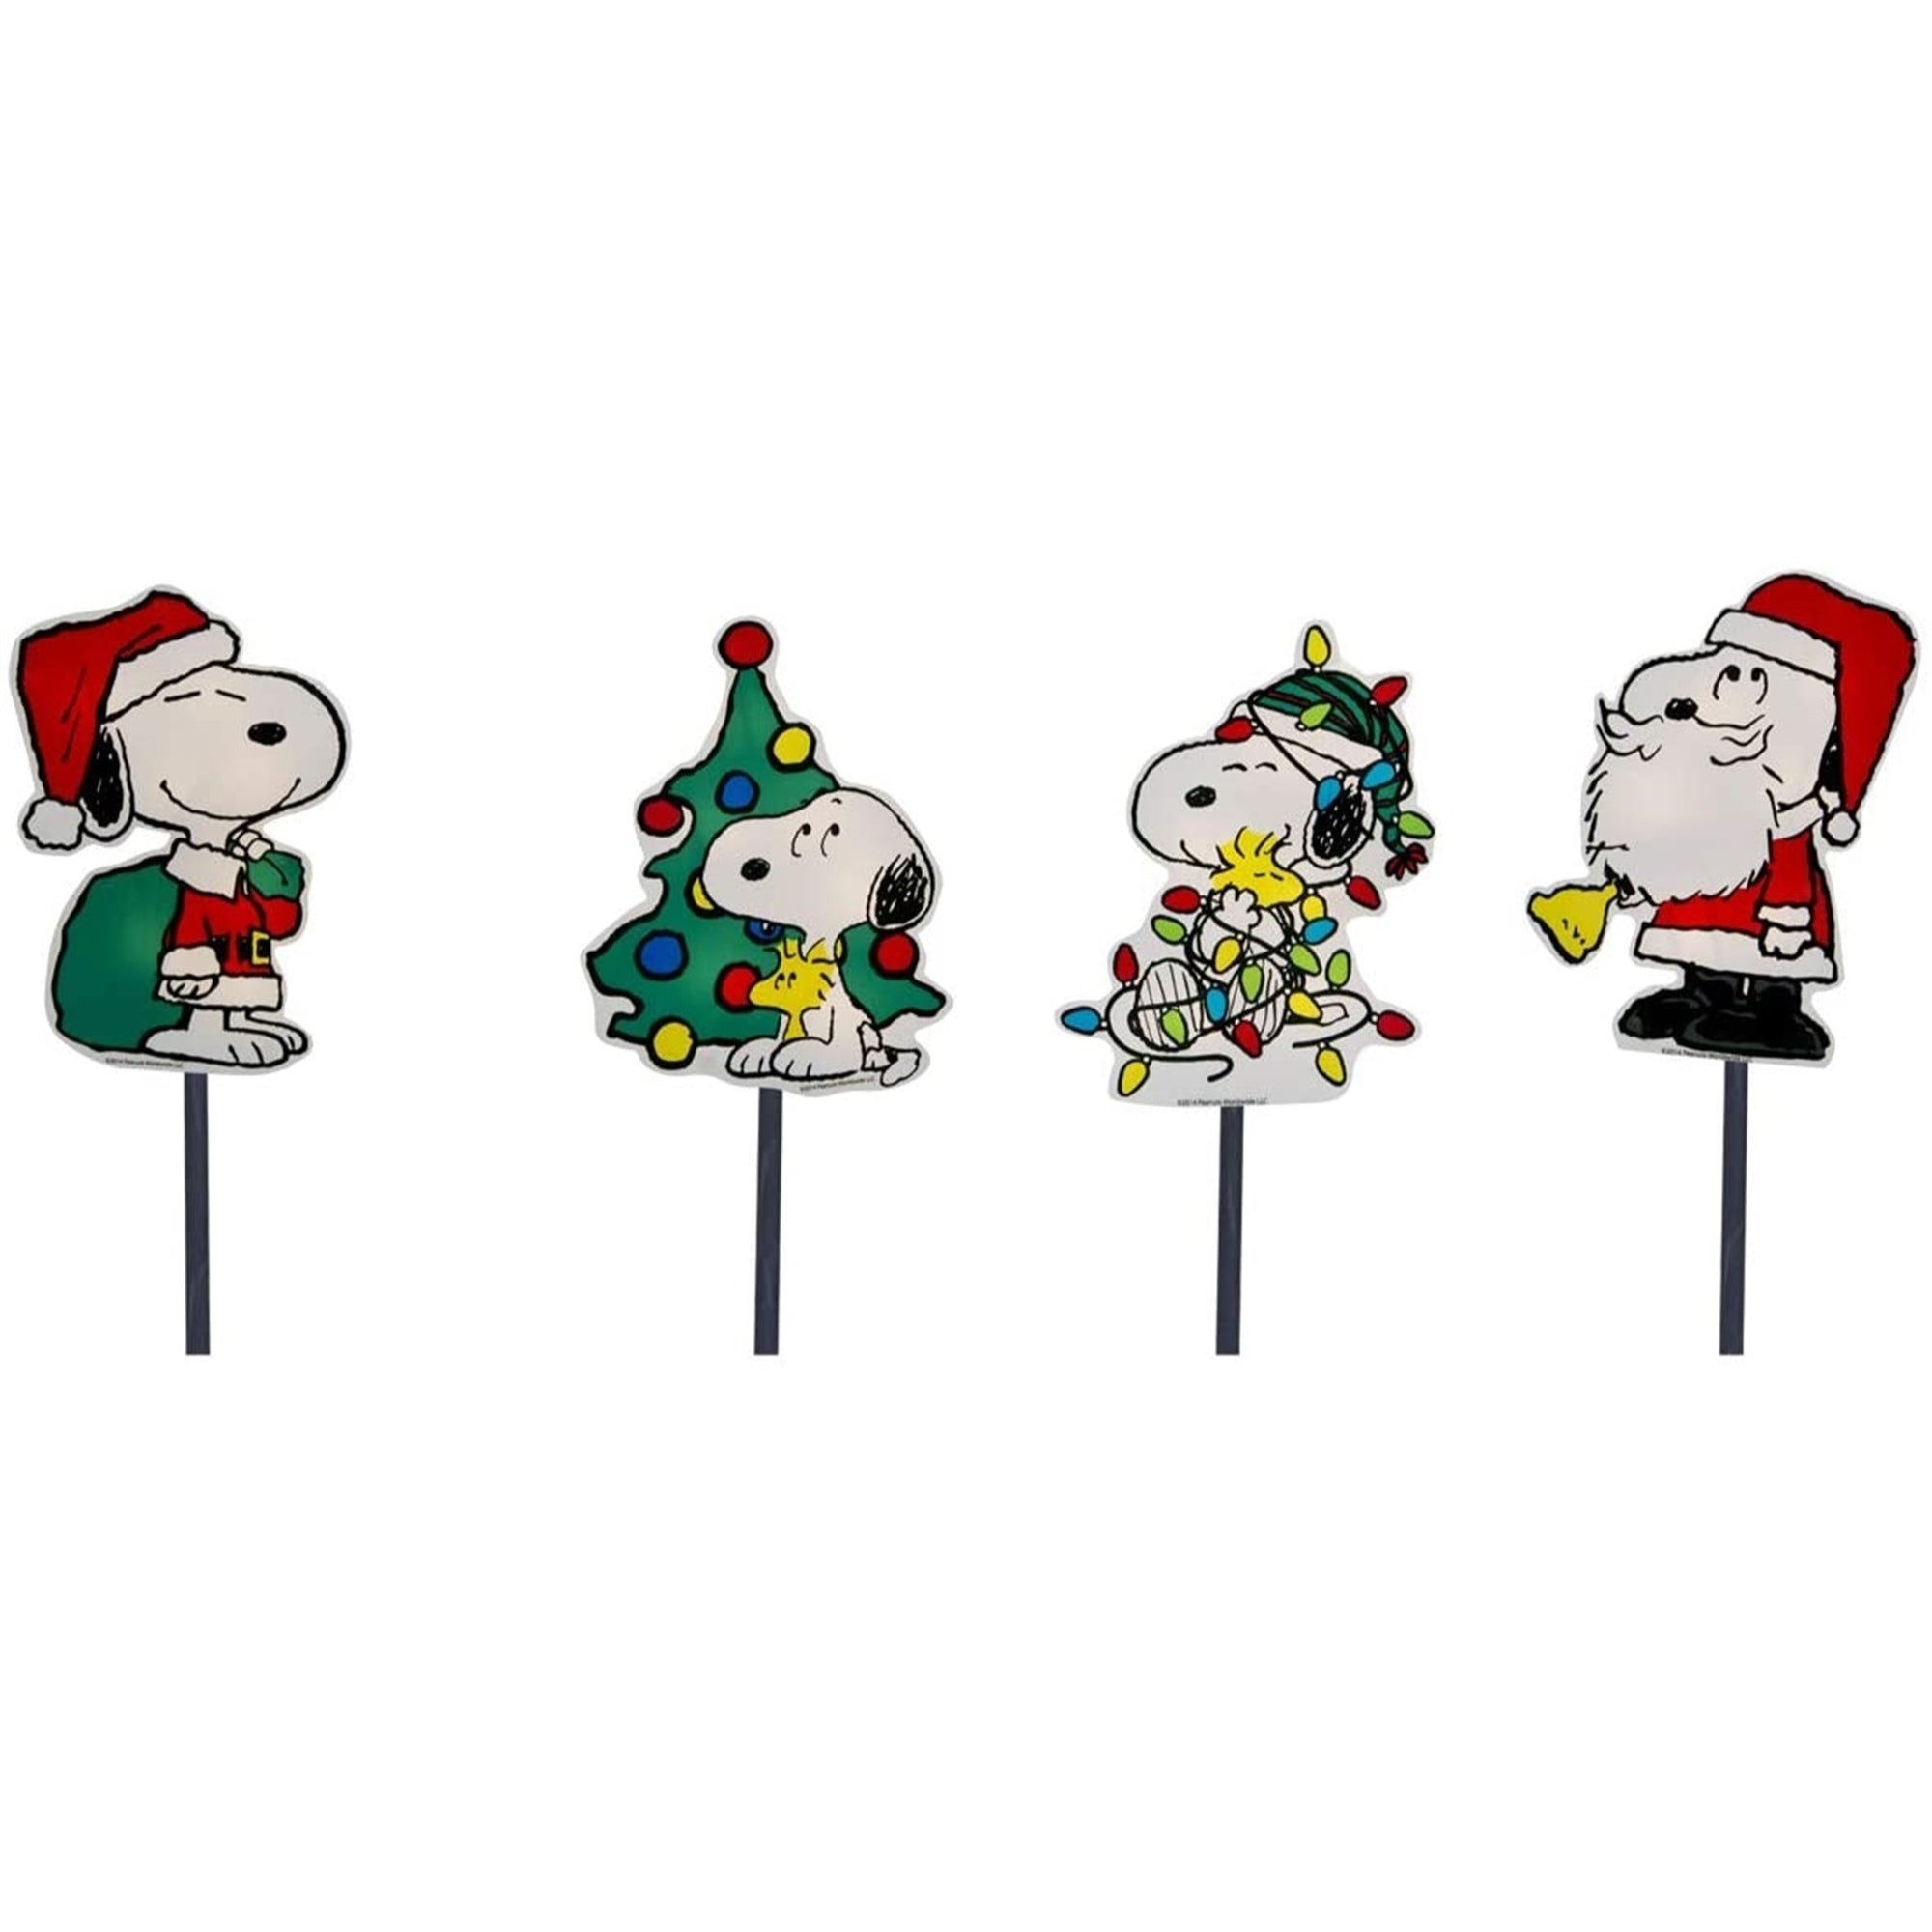 ProductWorks Peanuts 2D LED Pre-Lit Flat PVC Pathway Markers Featuring Snoopy Christmas Yard Art, 12-Inch